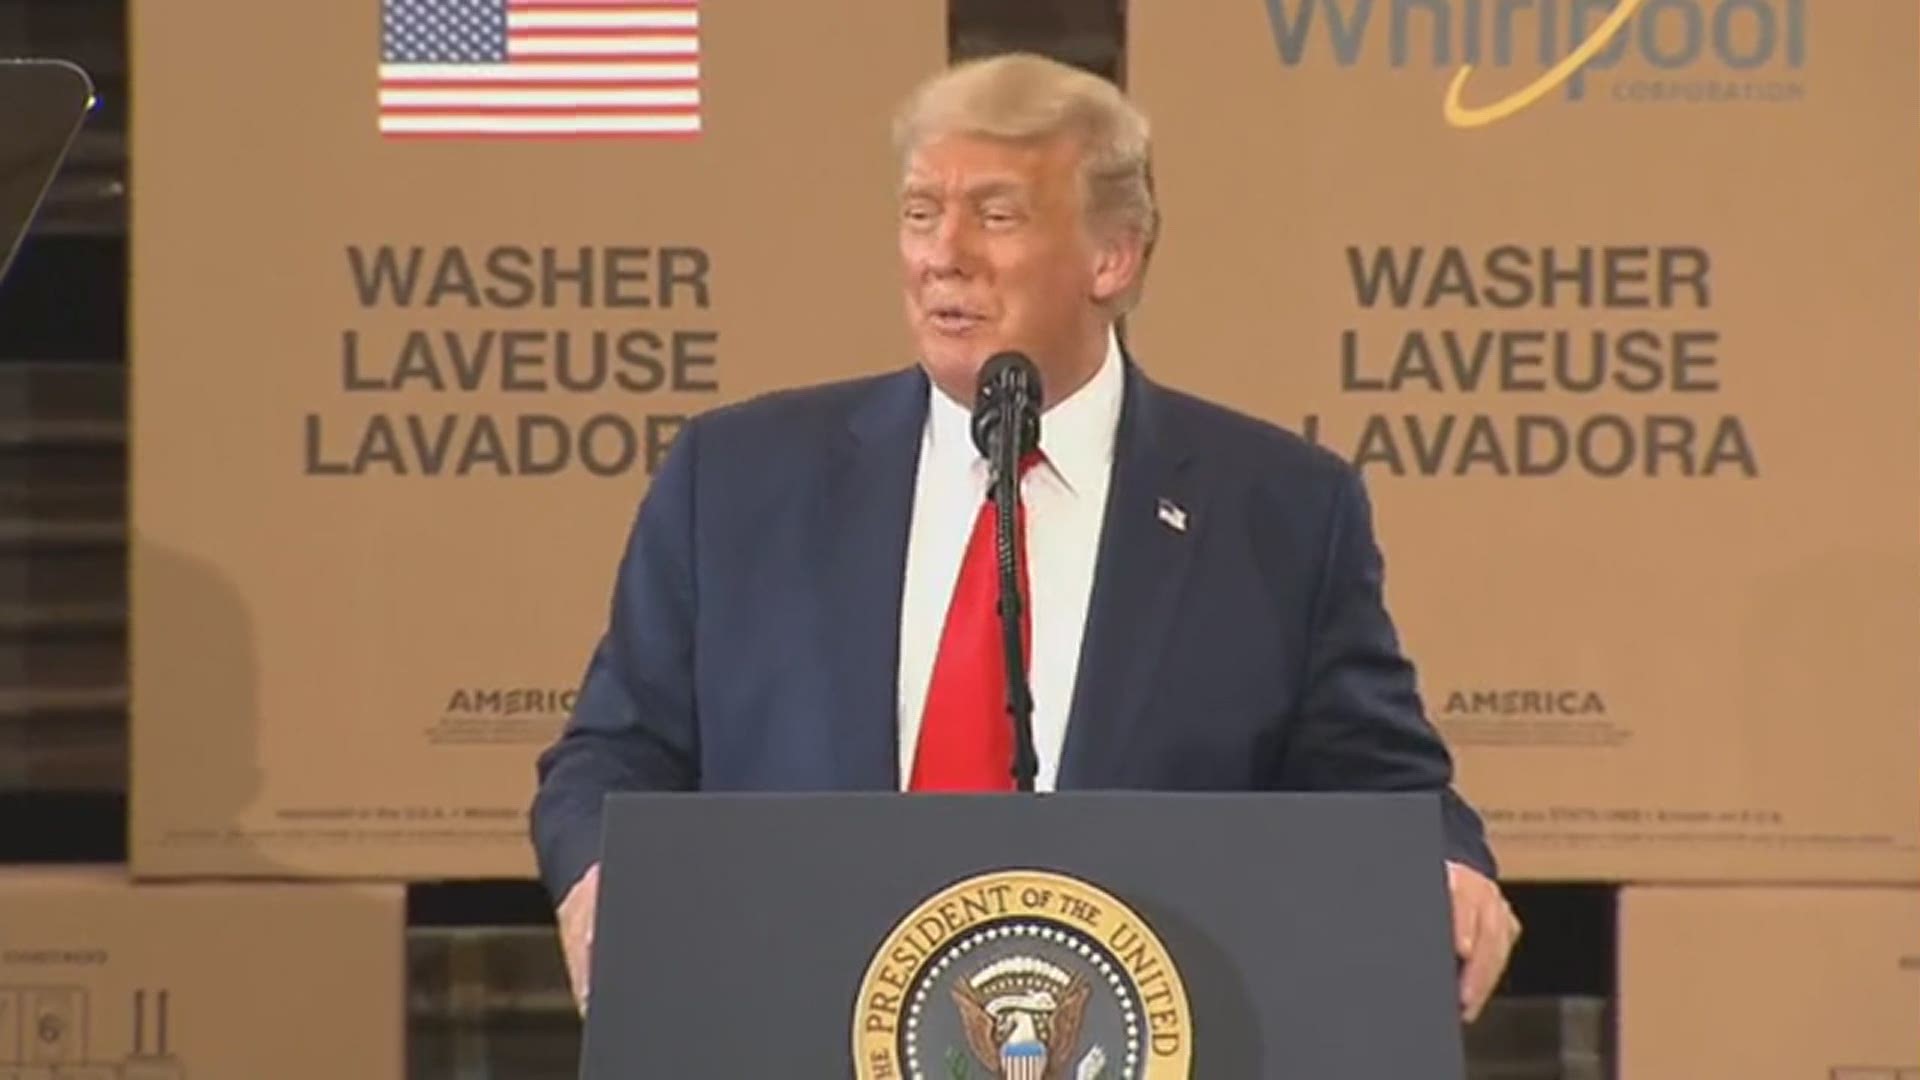 President Donald Trump touts his relationship with the state of Ohio during a speech at the Clyde Whirlpool plant.